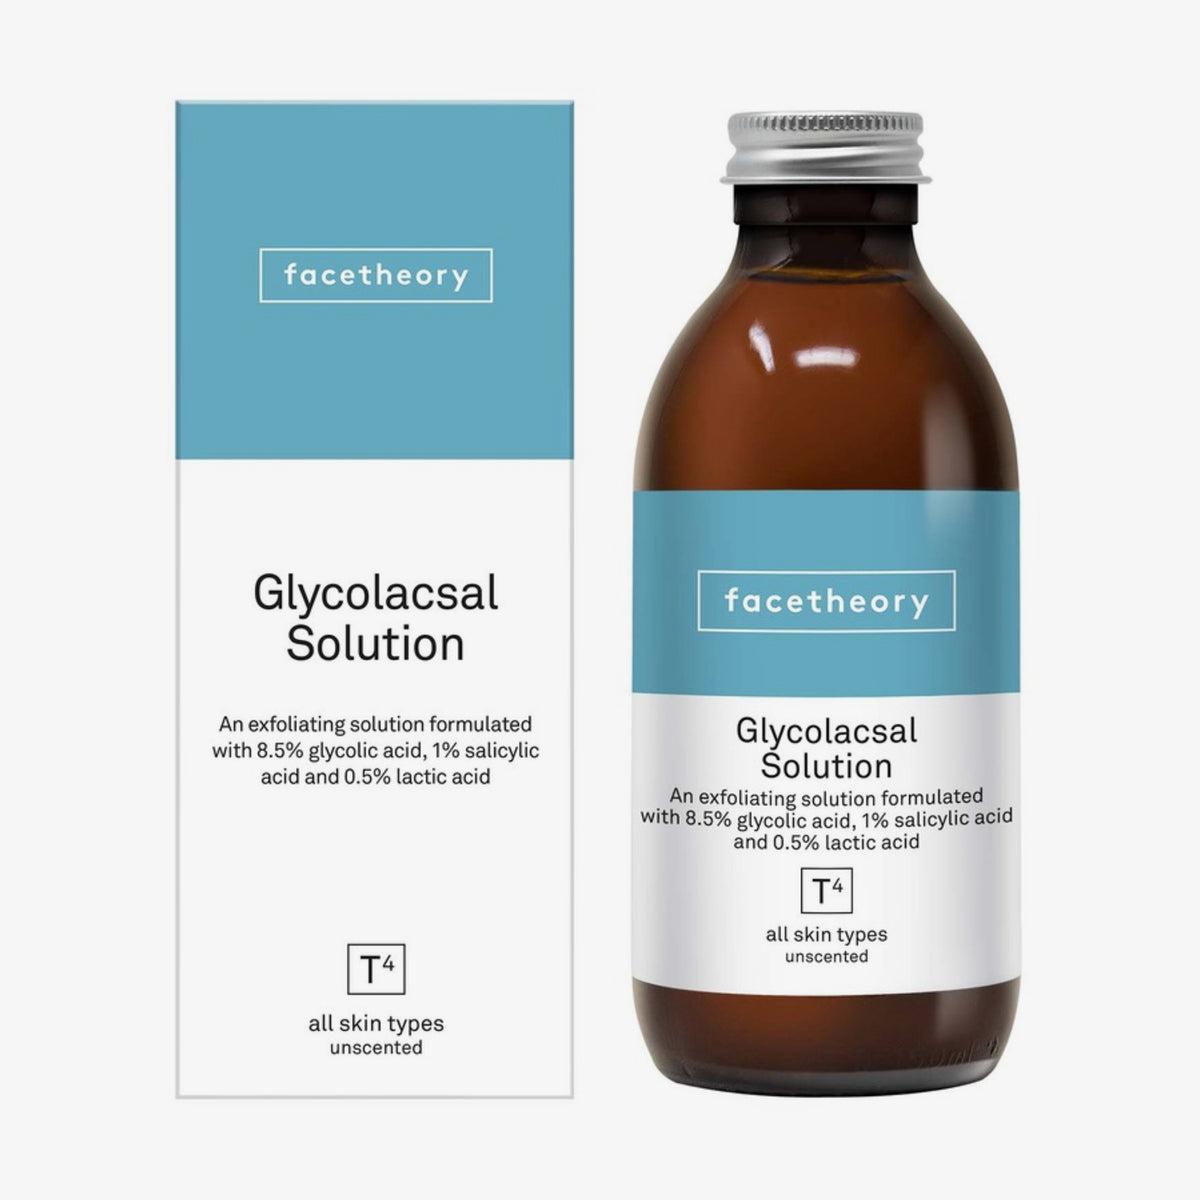 facetheory | Glycolacsal Solution